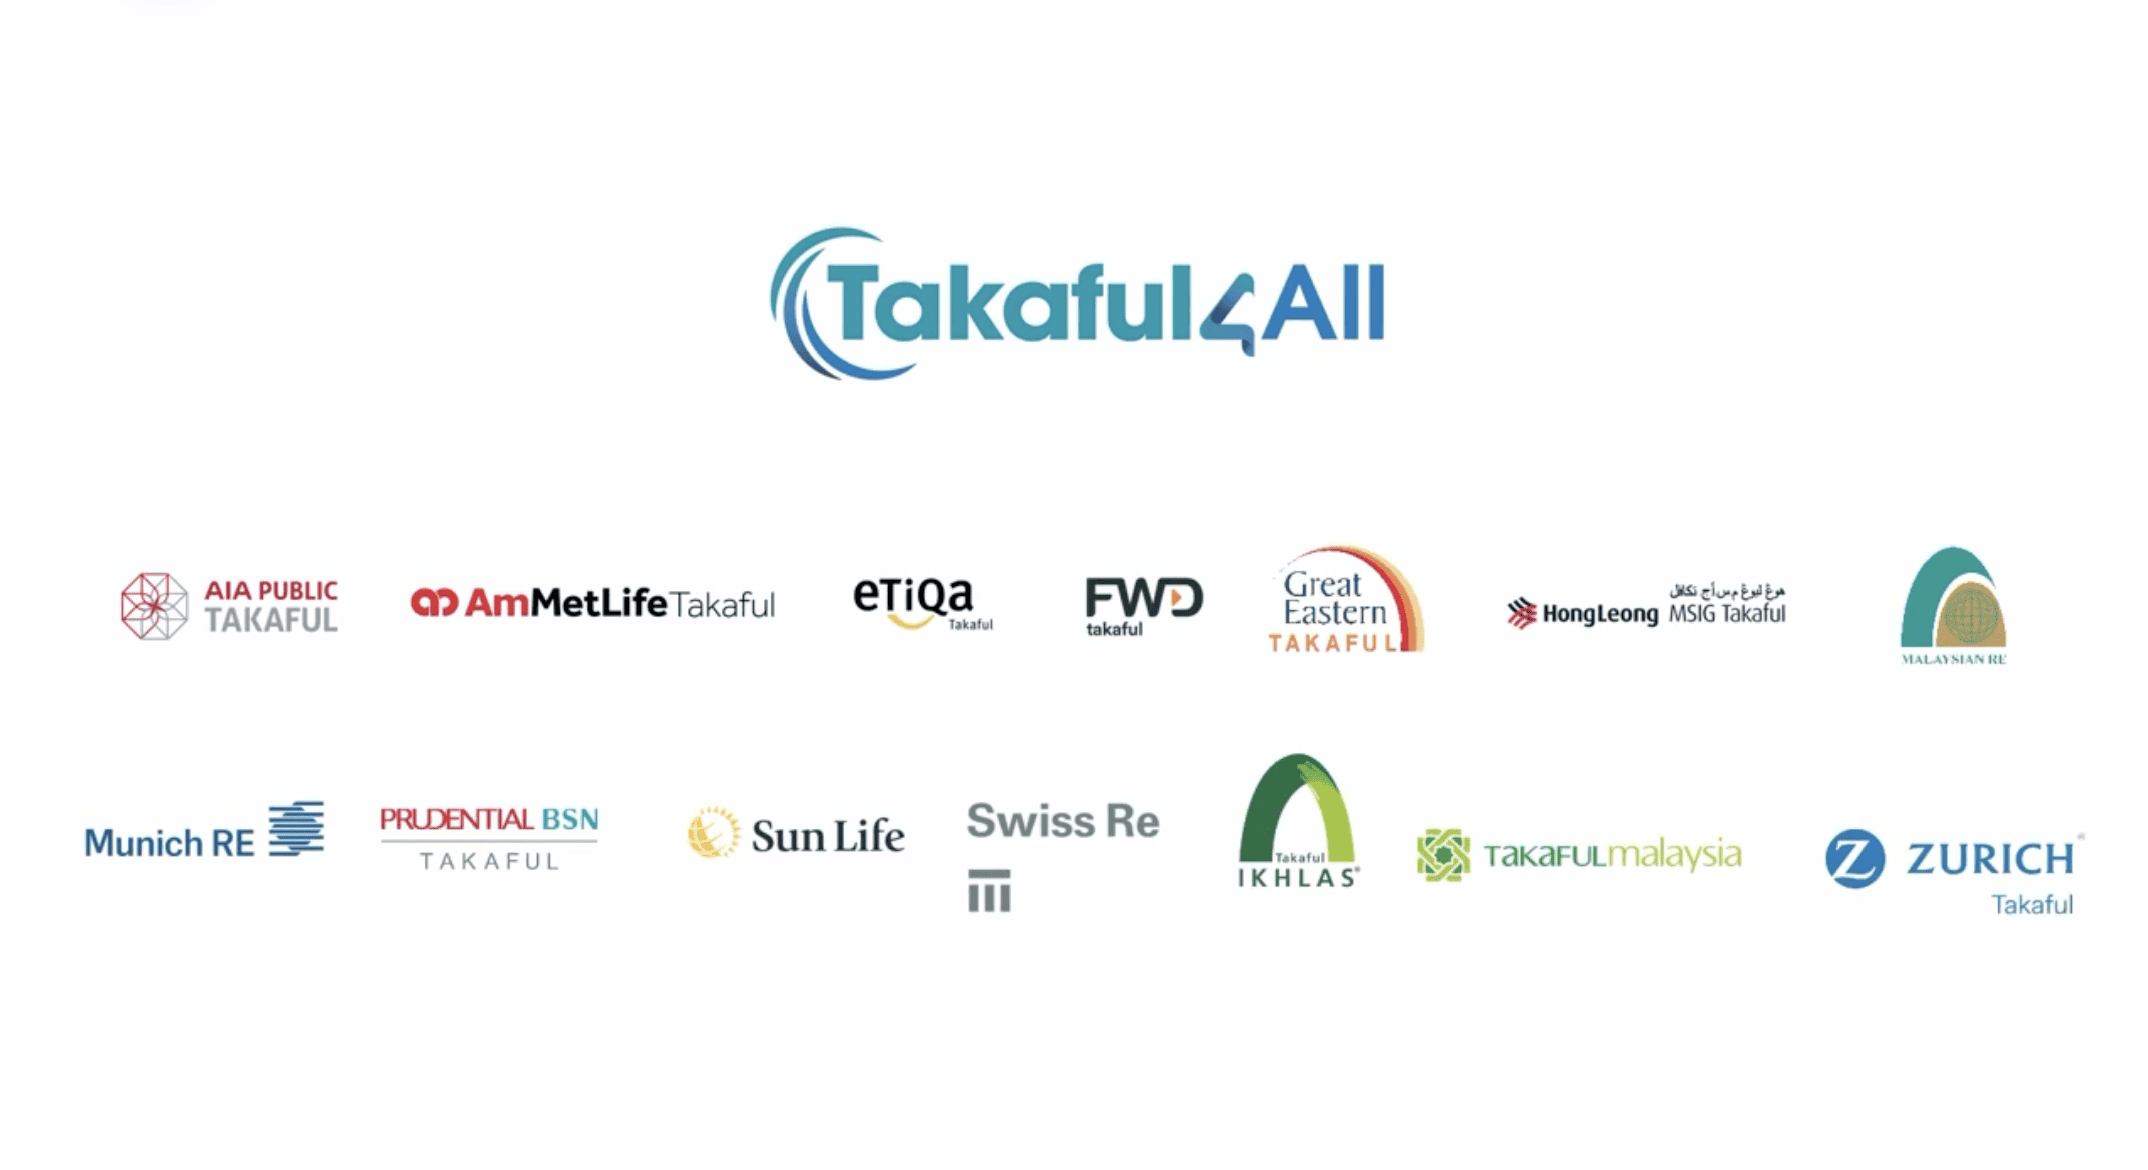 MTA Launch Takaful4all Initiatives as a Part  of Takaful Visibility Strategy